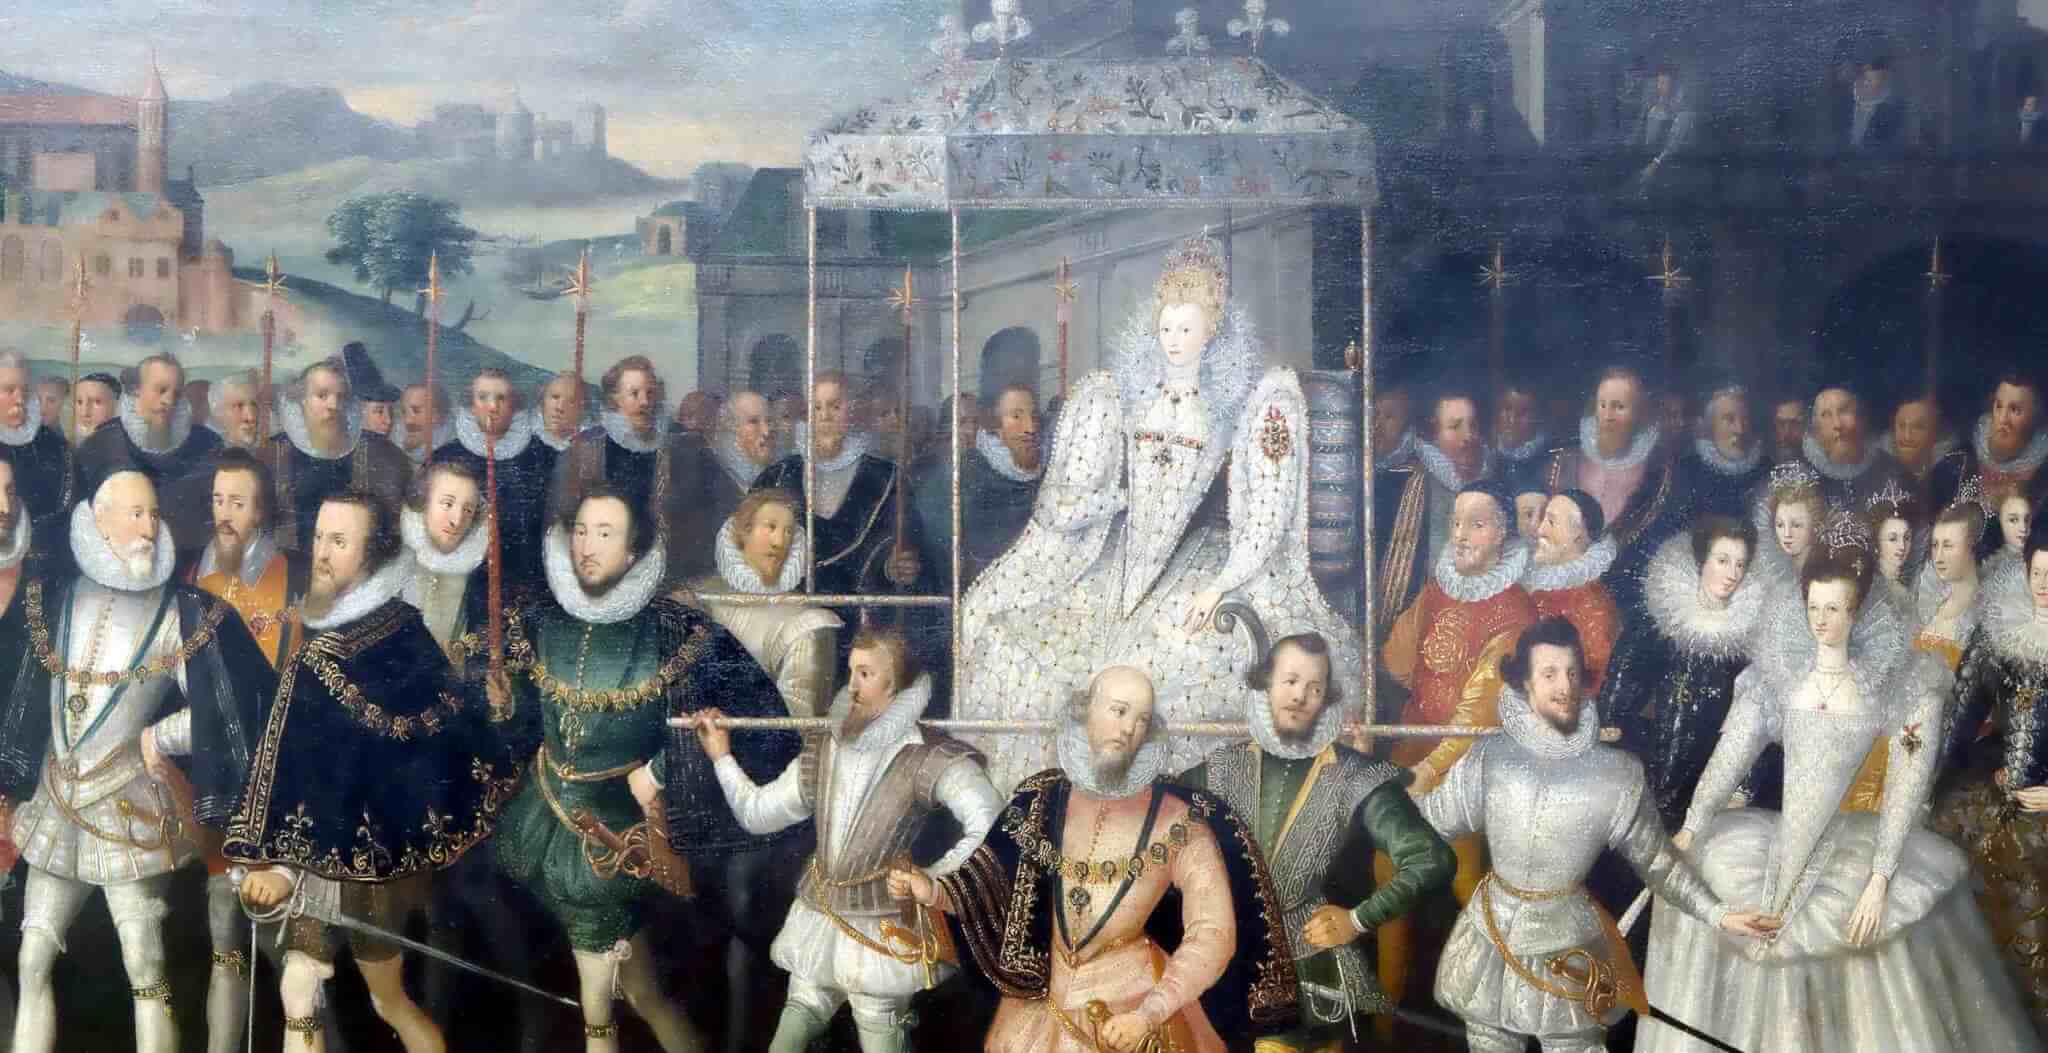 history queen elizabeth english england queens britain list family elizabethan historic why wedding kings life champion events anne mary